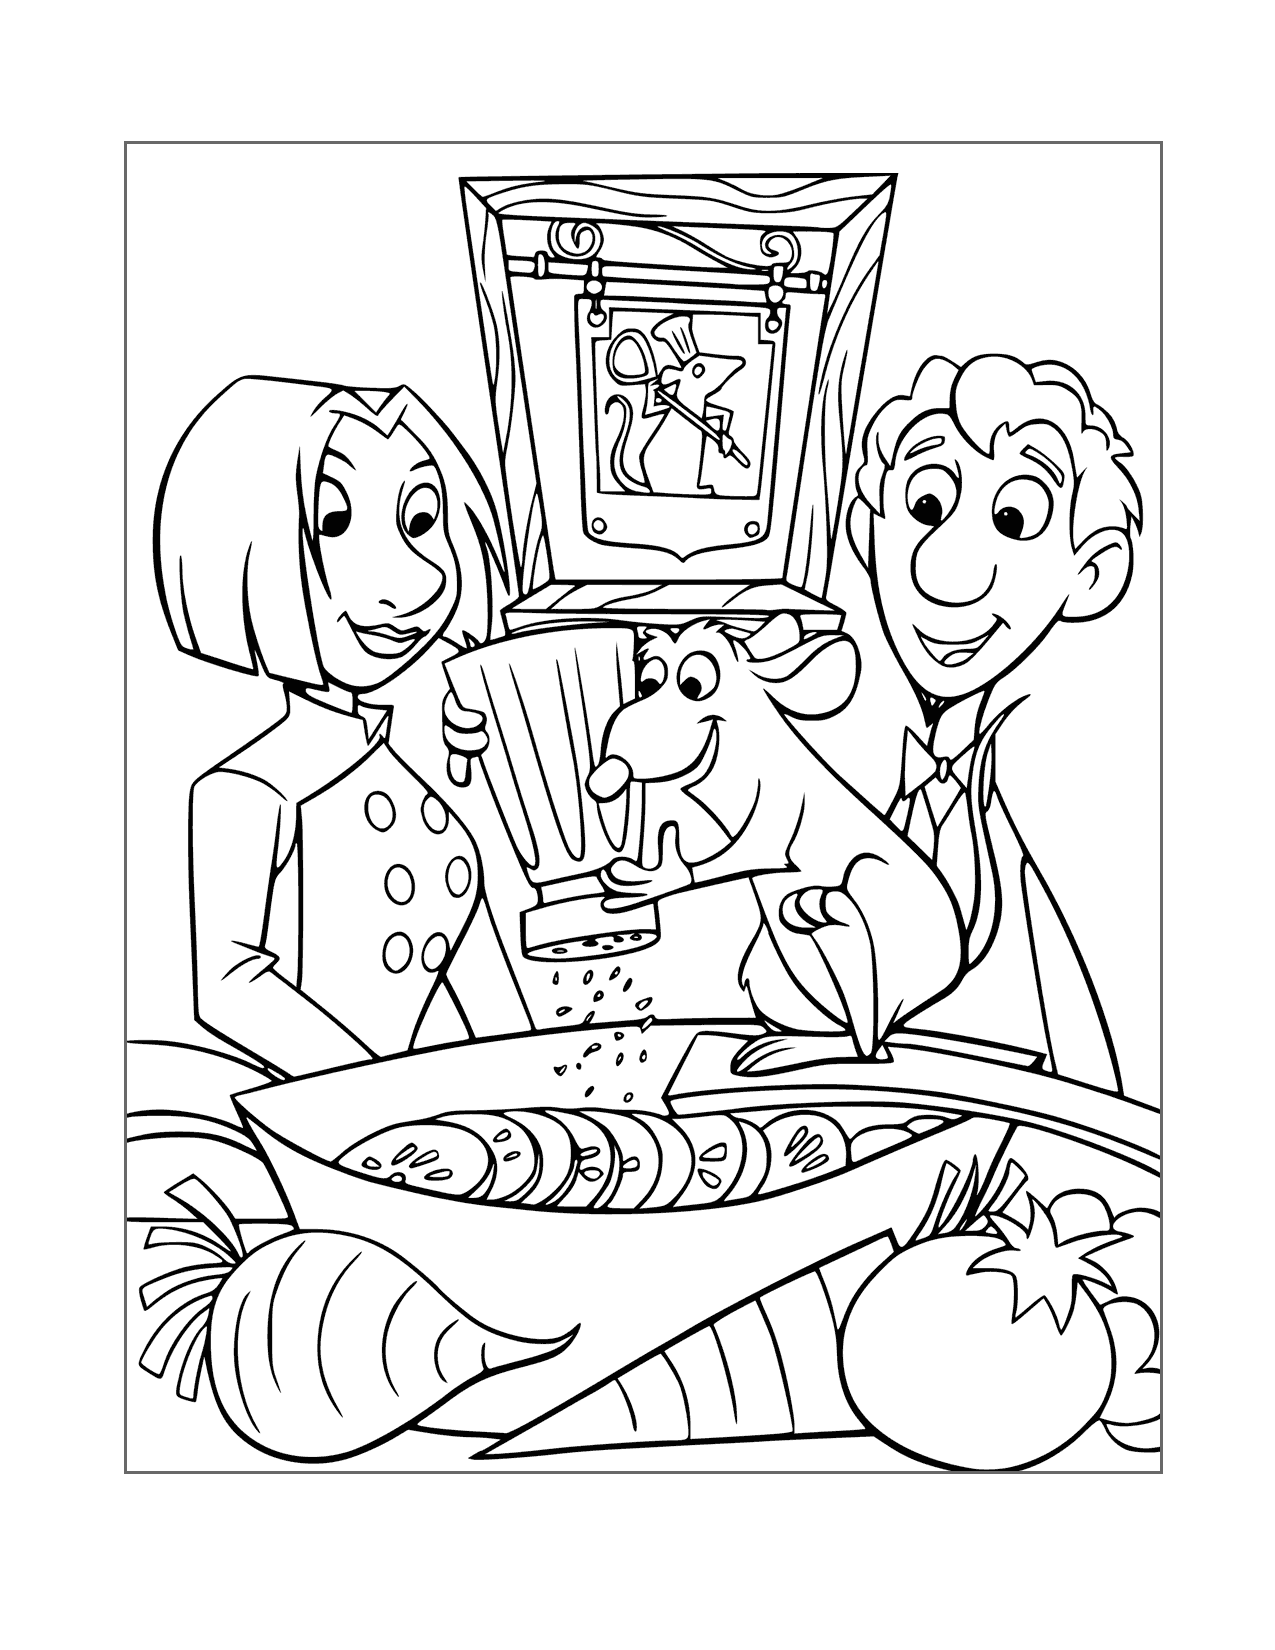 Remy Cooks For Colette And Linguini Coloring Page